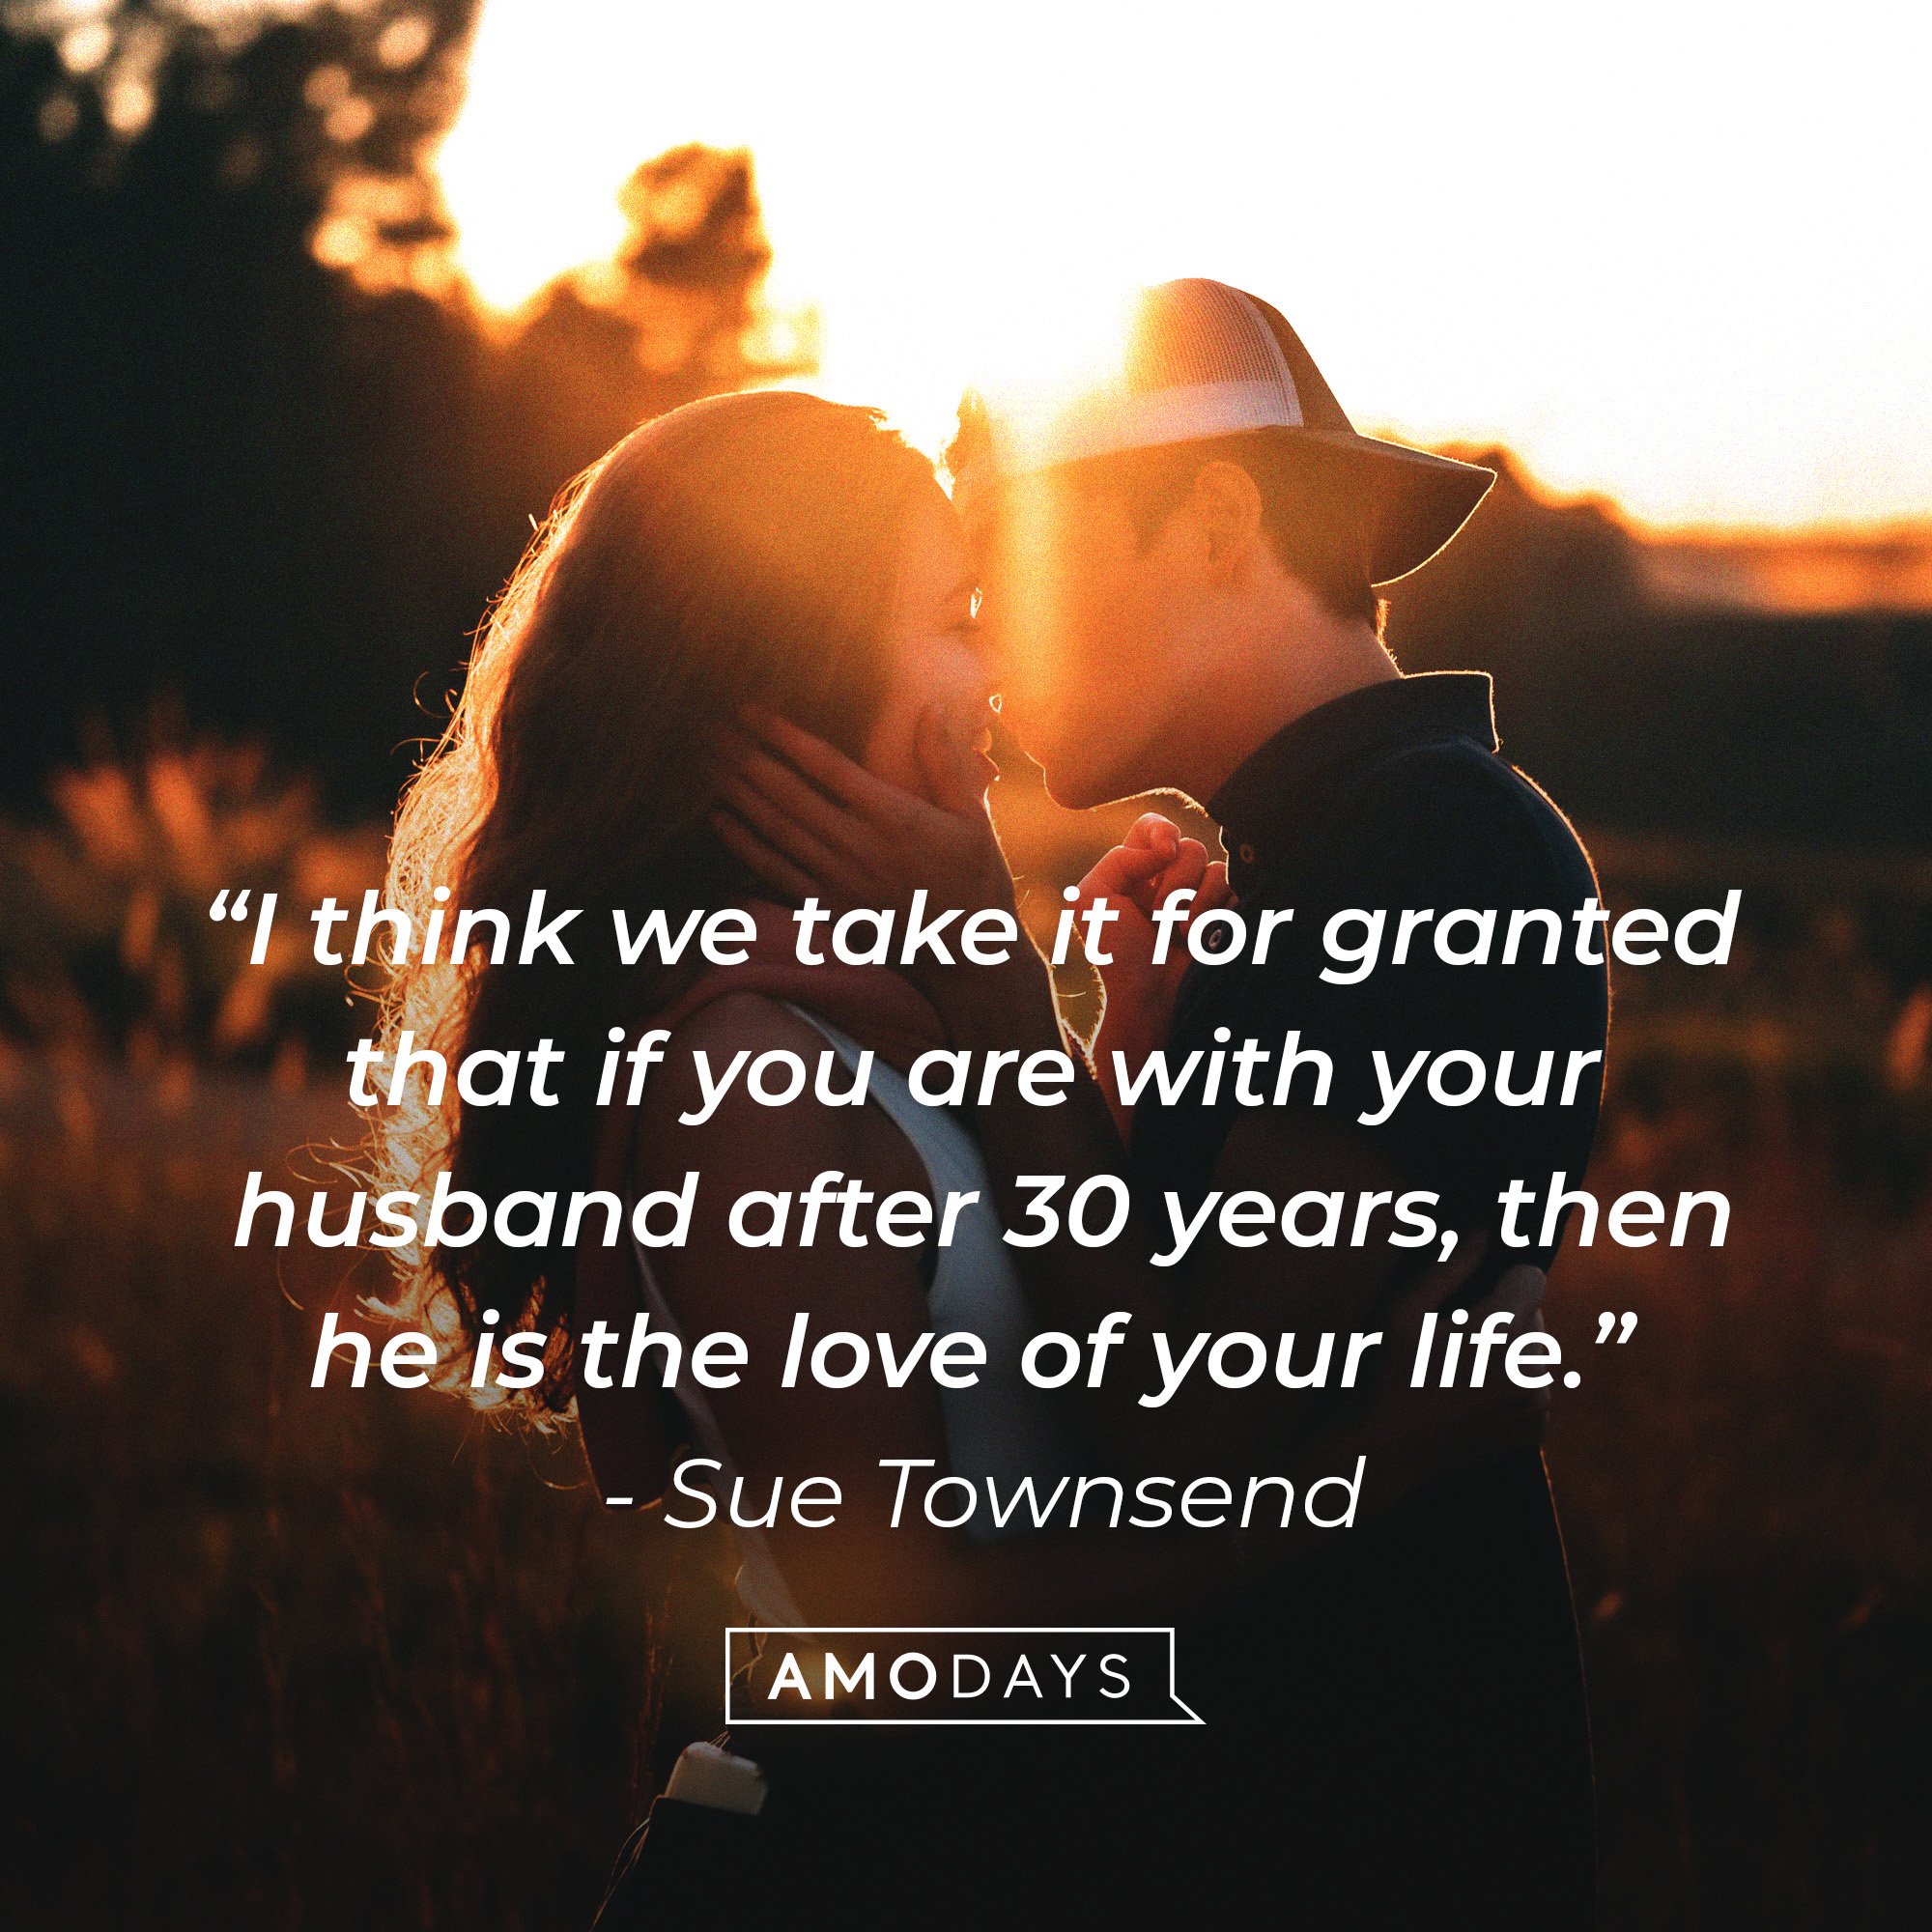 Sue Townsend's quote: “I think we take it for granted that if you are with your husband after 30 years, then he is the love of your life.” | Image: AmoDays